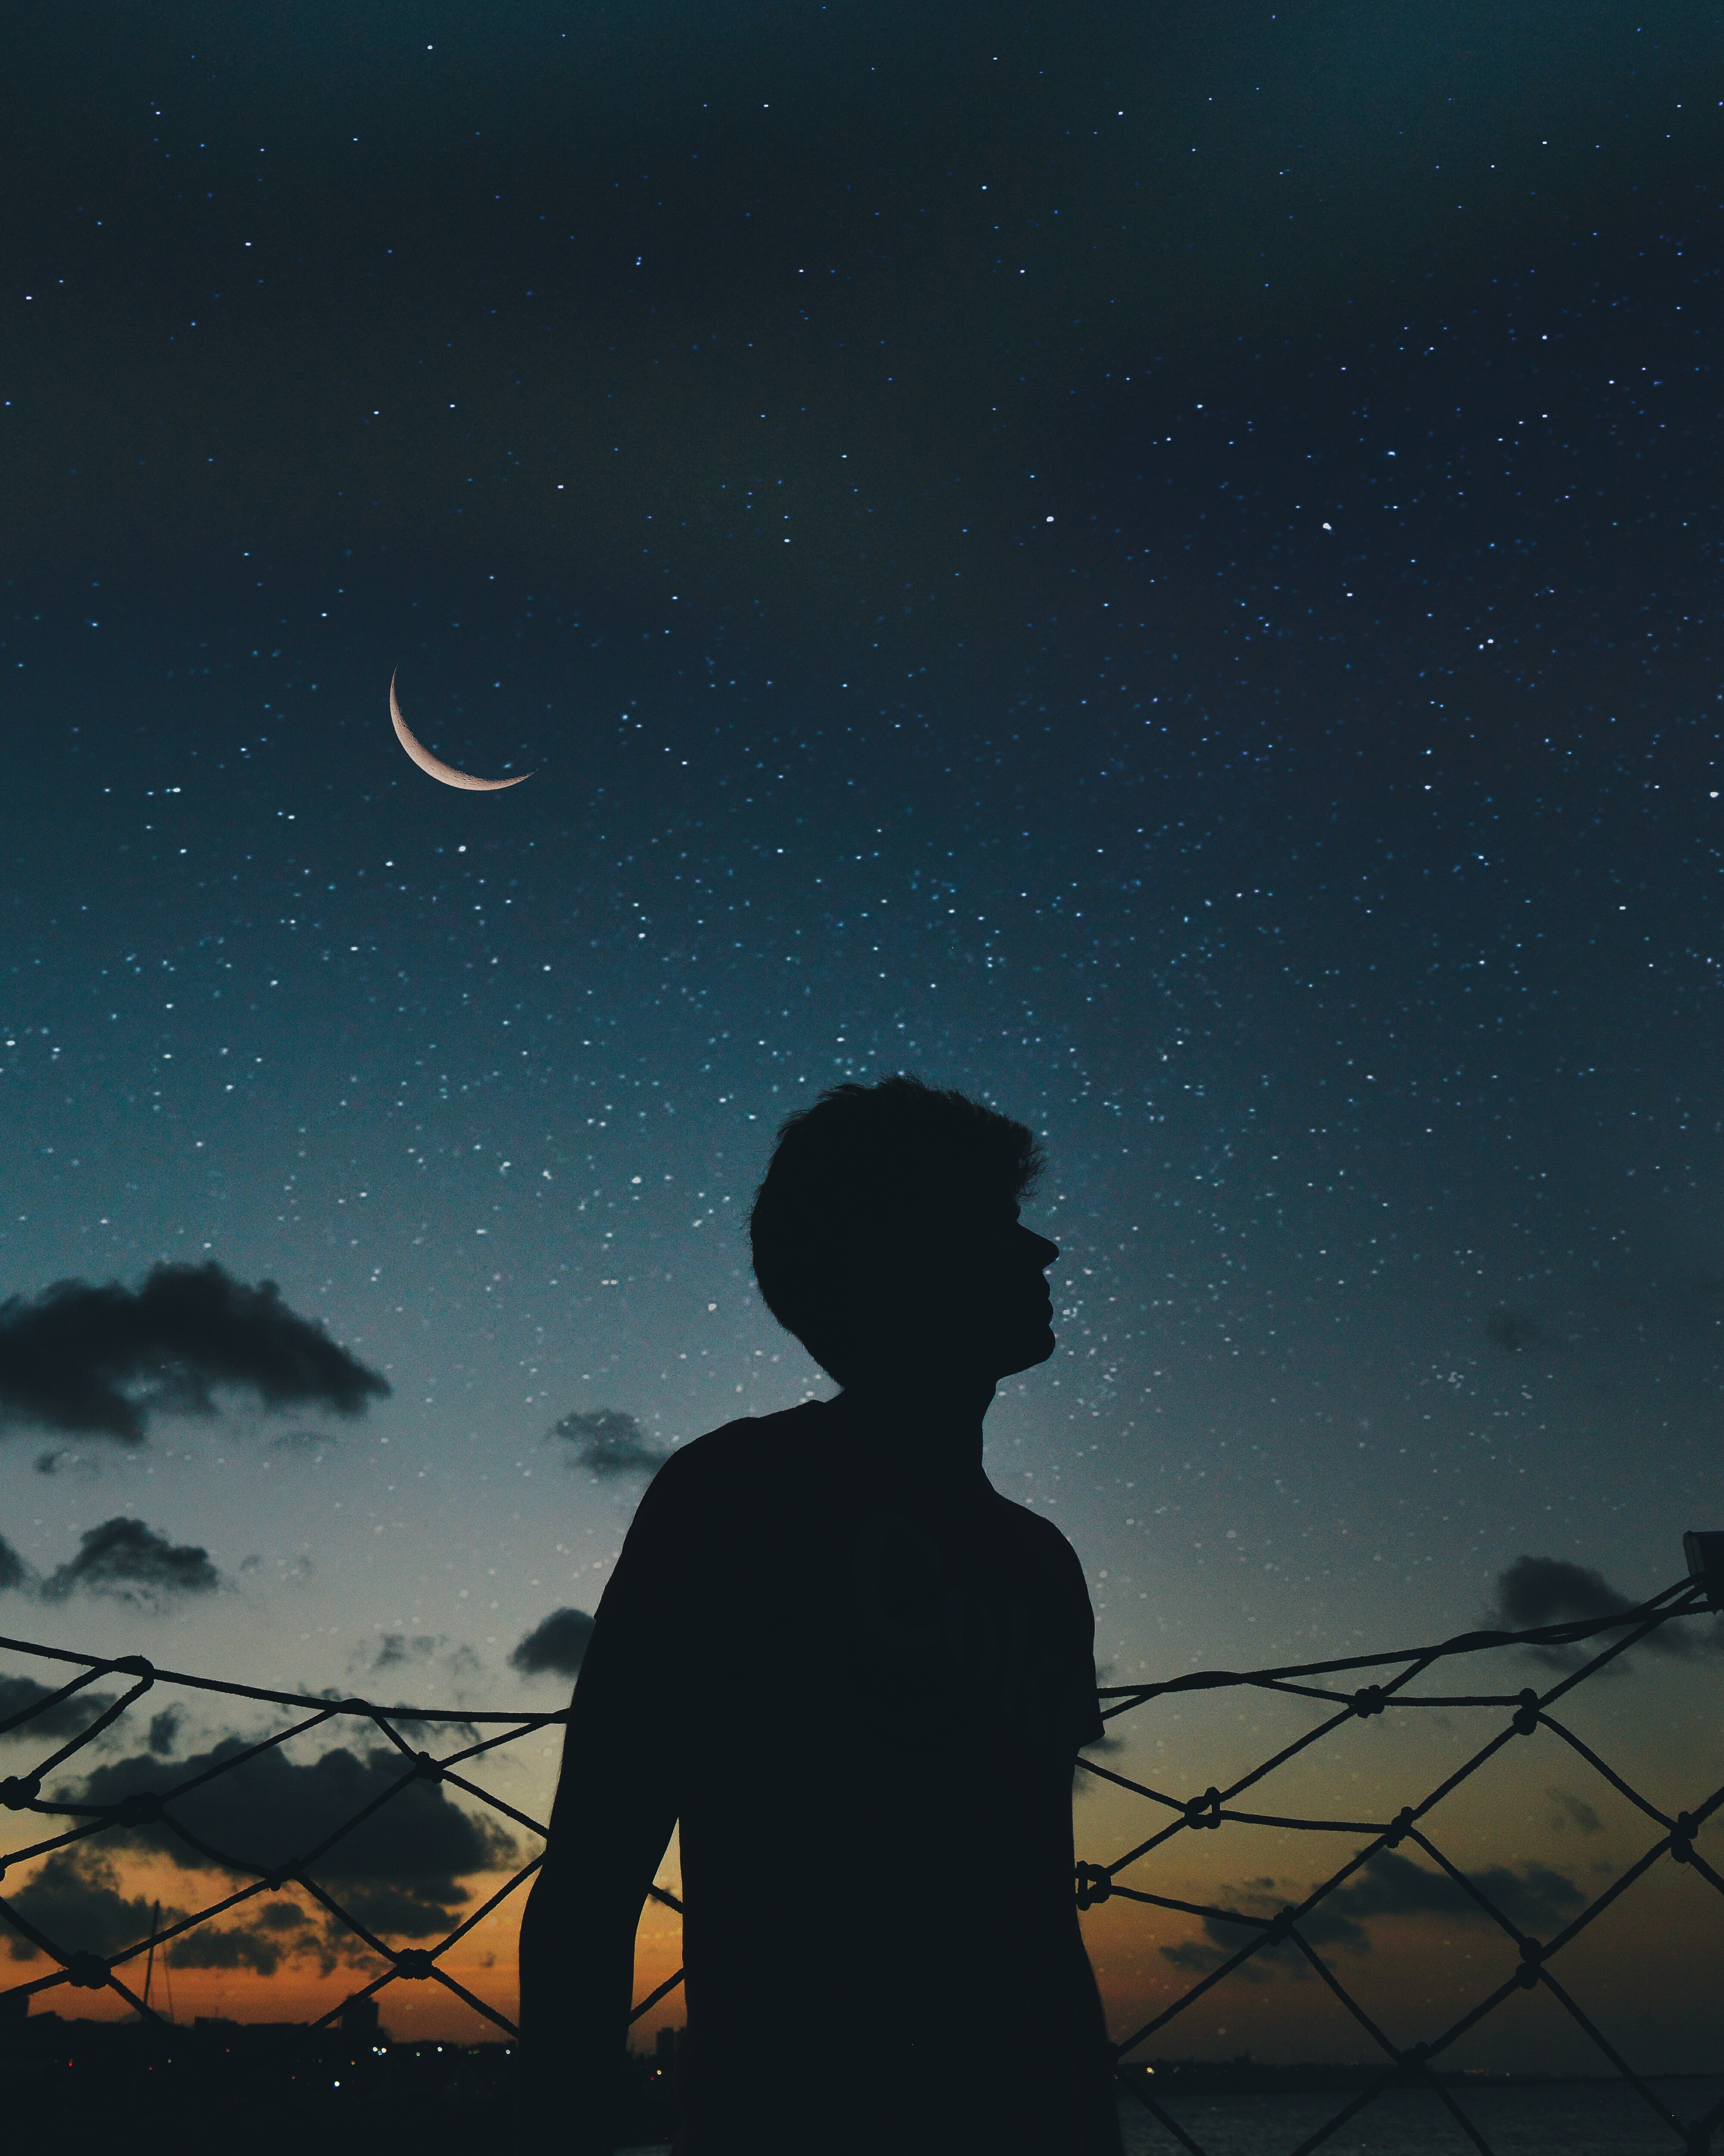 loneliness, dark, silhouette, starry sky images